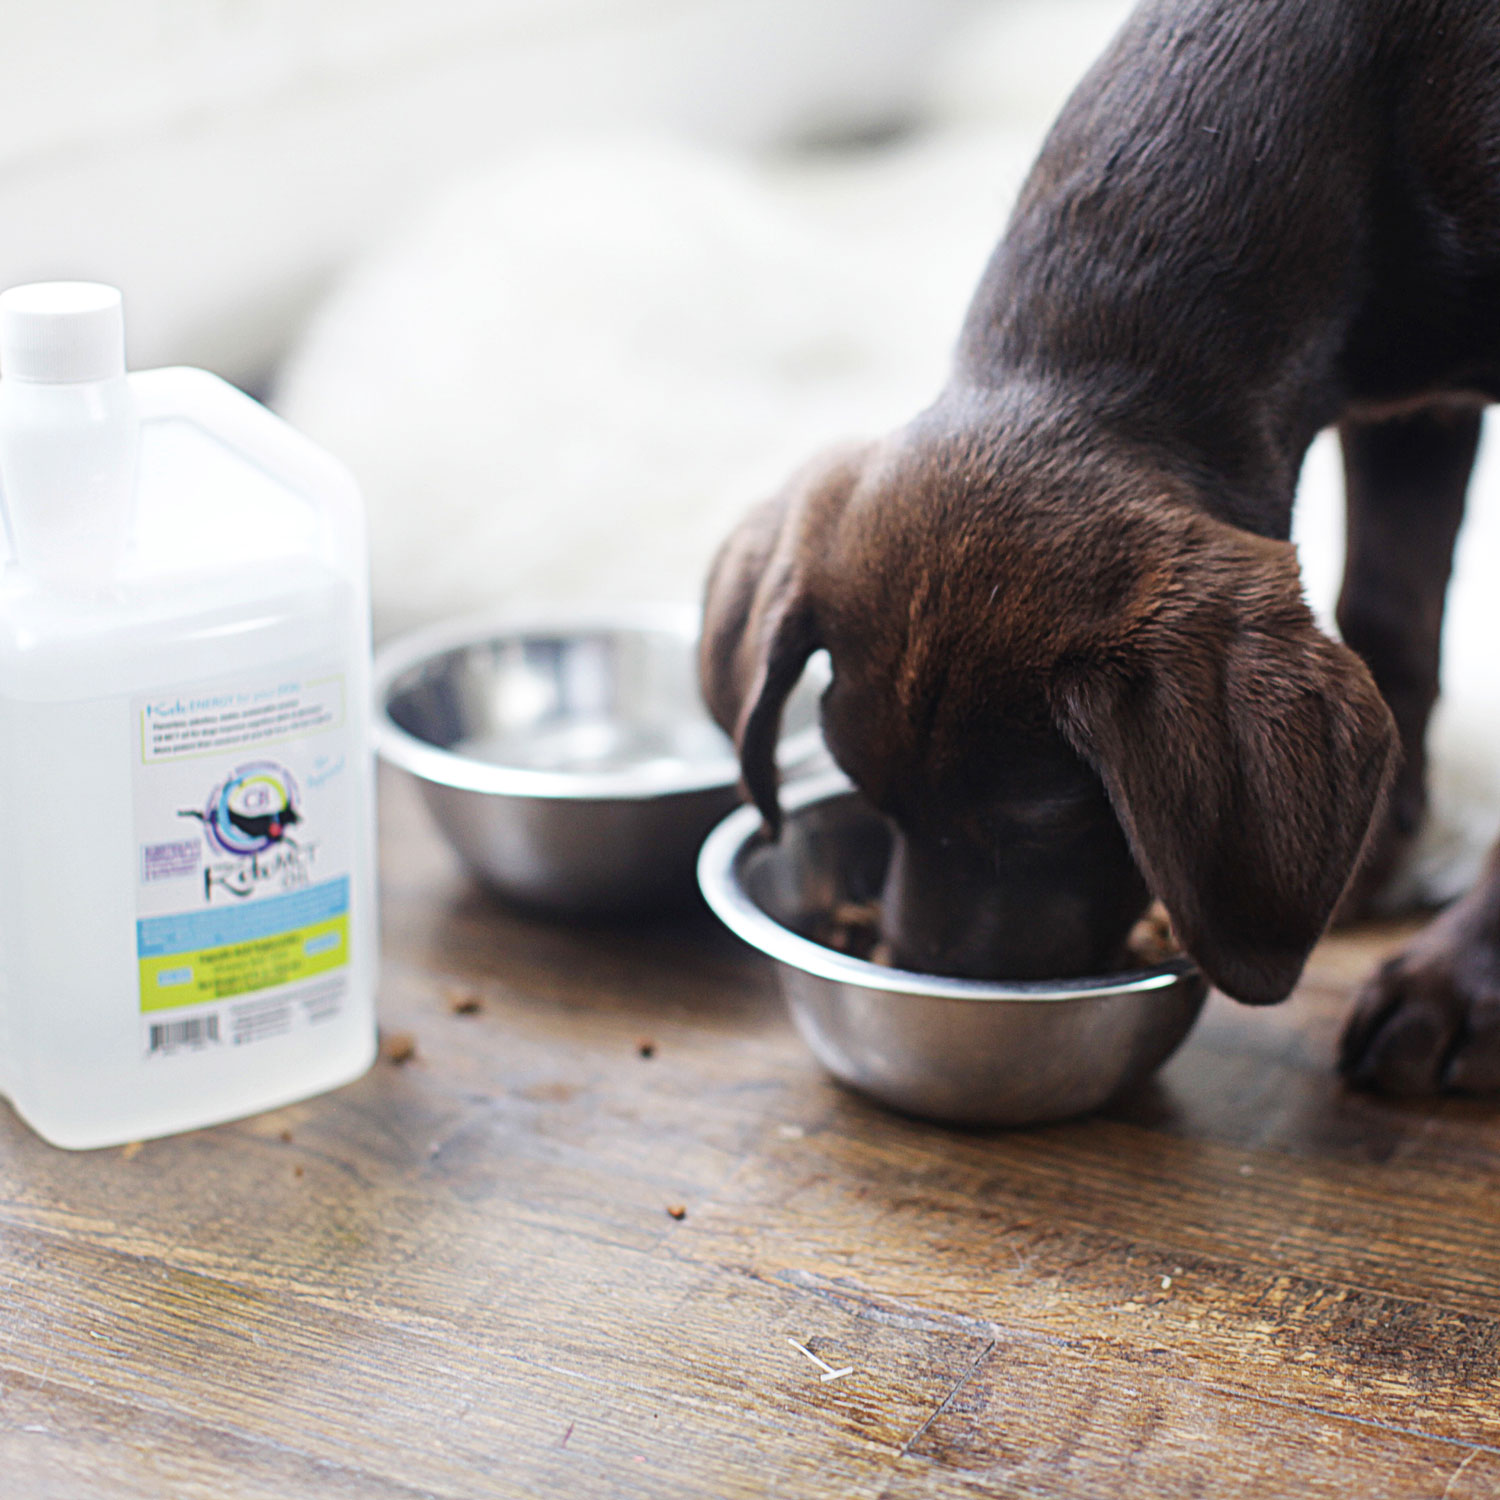 Make your own custom dog treat with our MCT oil, but be careful not to exceed the recommended daily amount of MCT oil for your dog’s weight.